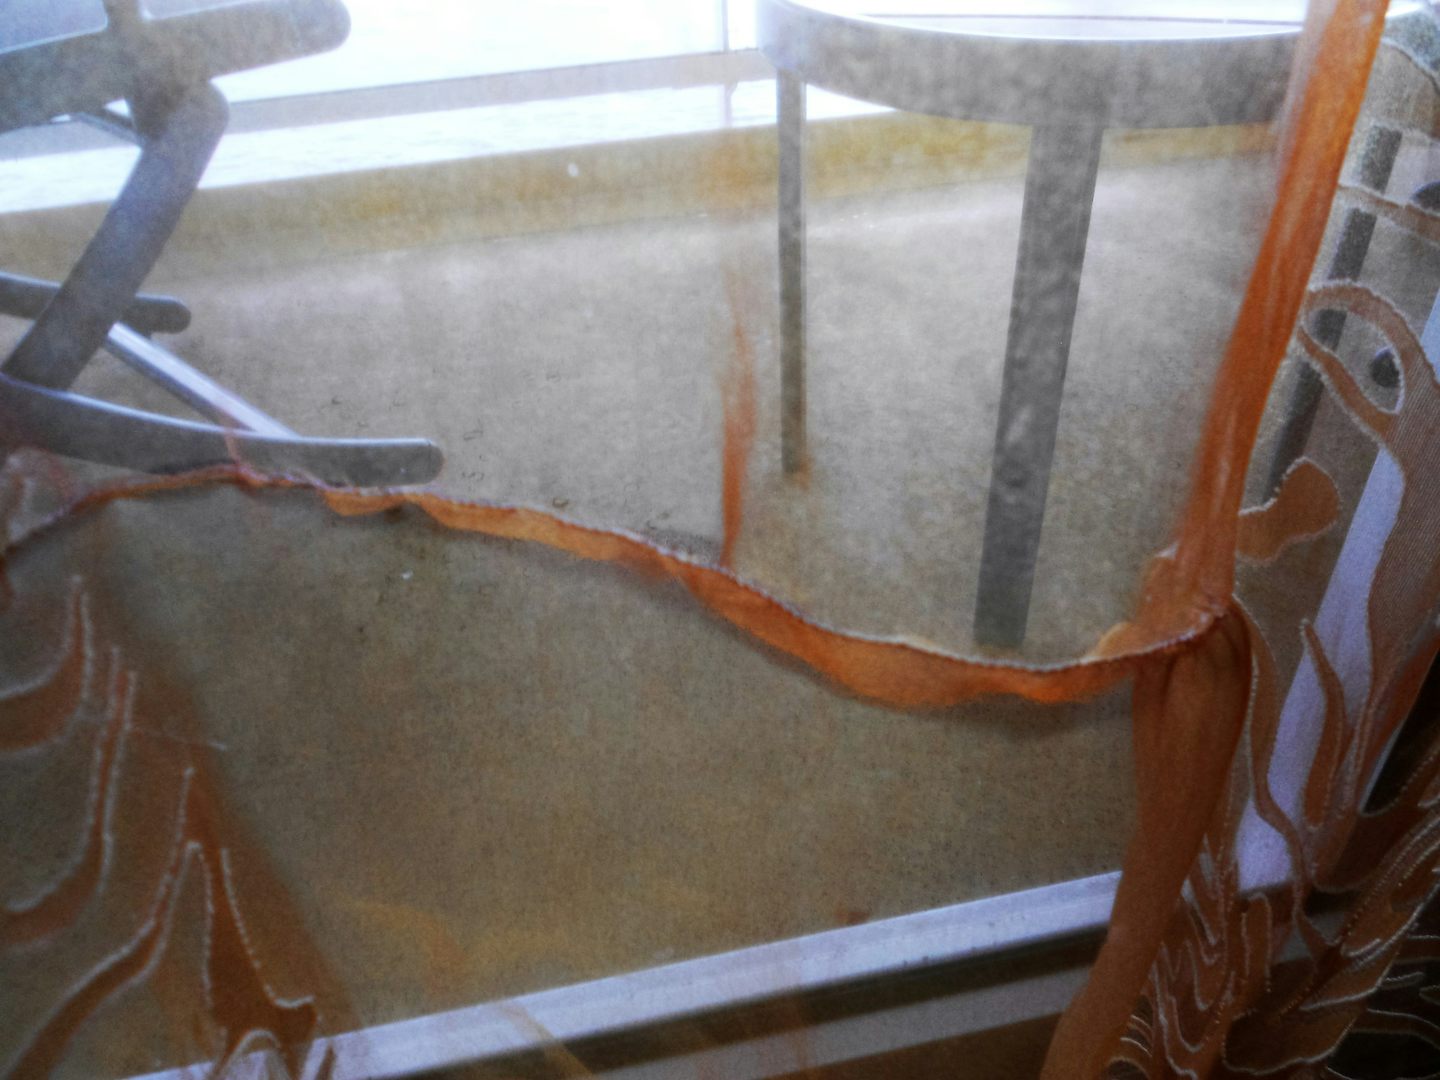 Disgusting state of curtains.